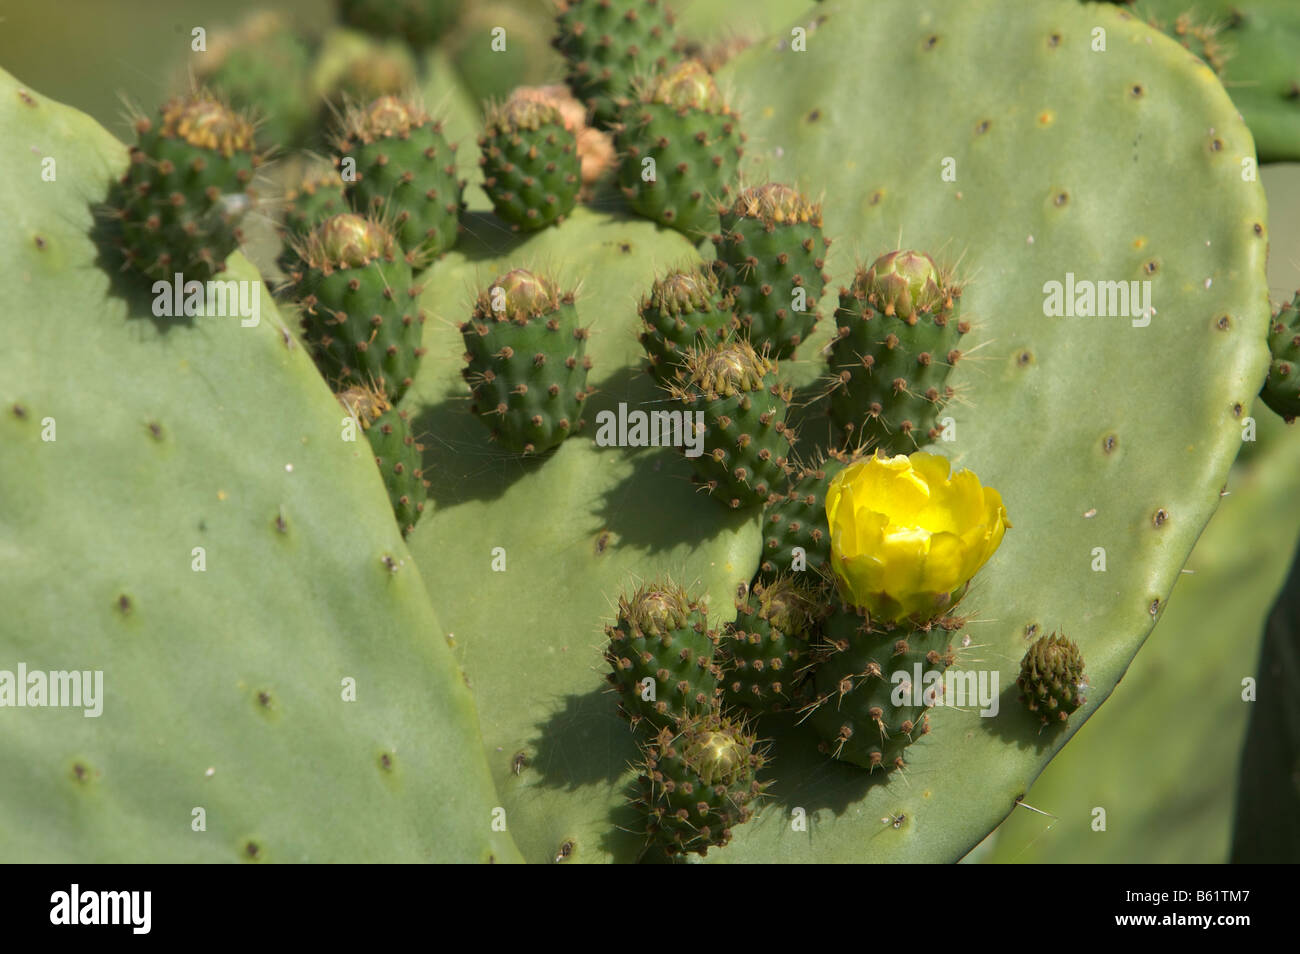 Indian Fig Opuntia Cactus (Opuntia ficus-indica) with a yellow flower Stock Photo